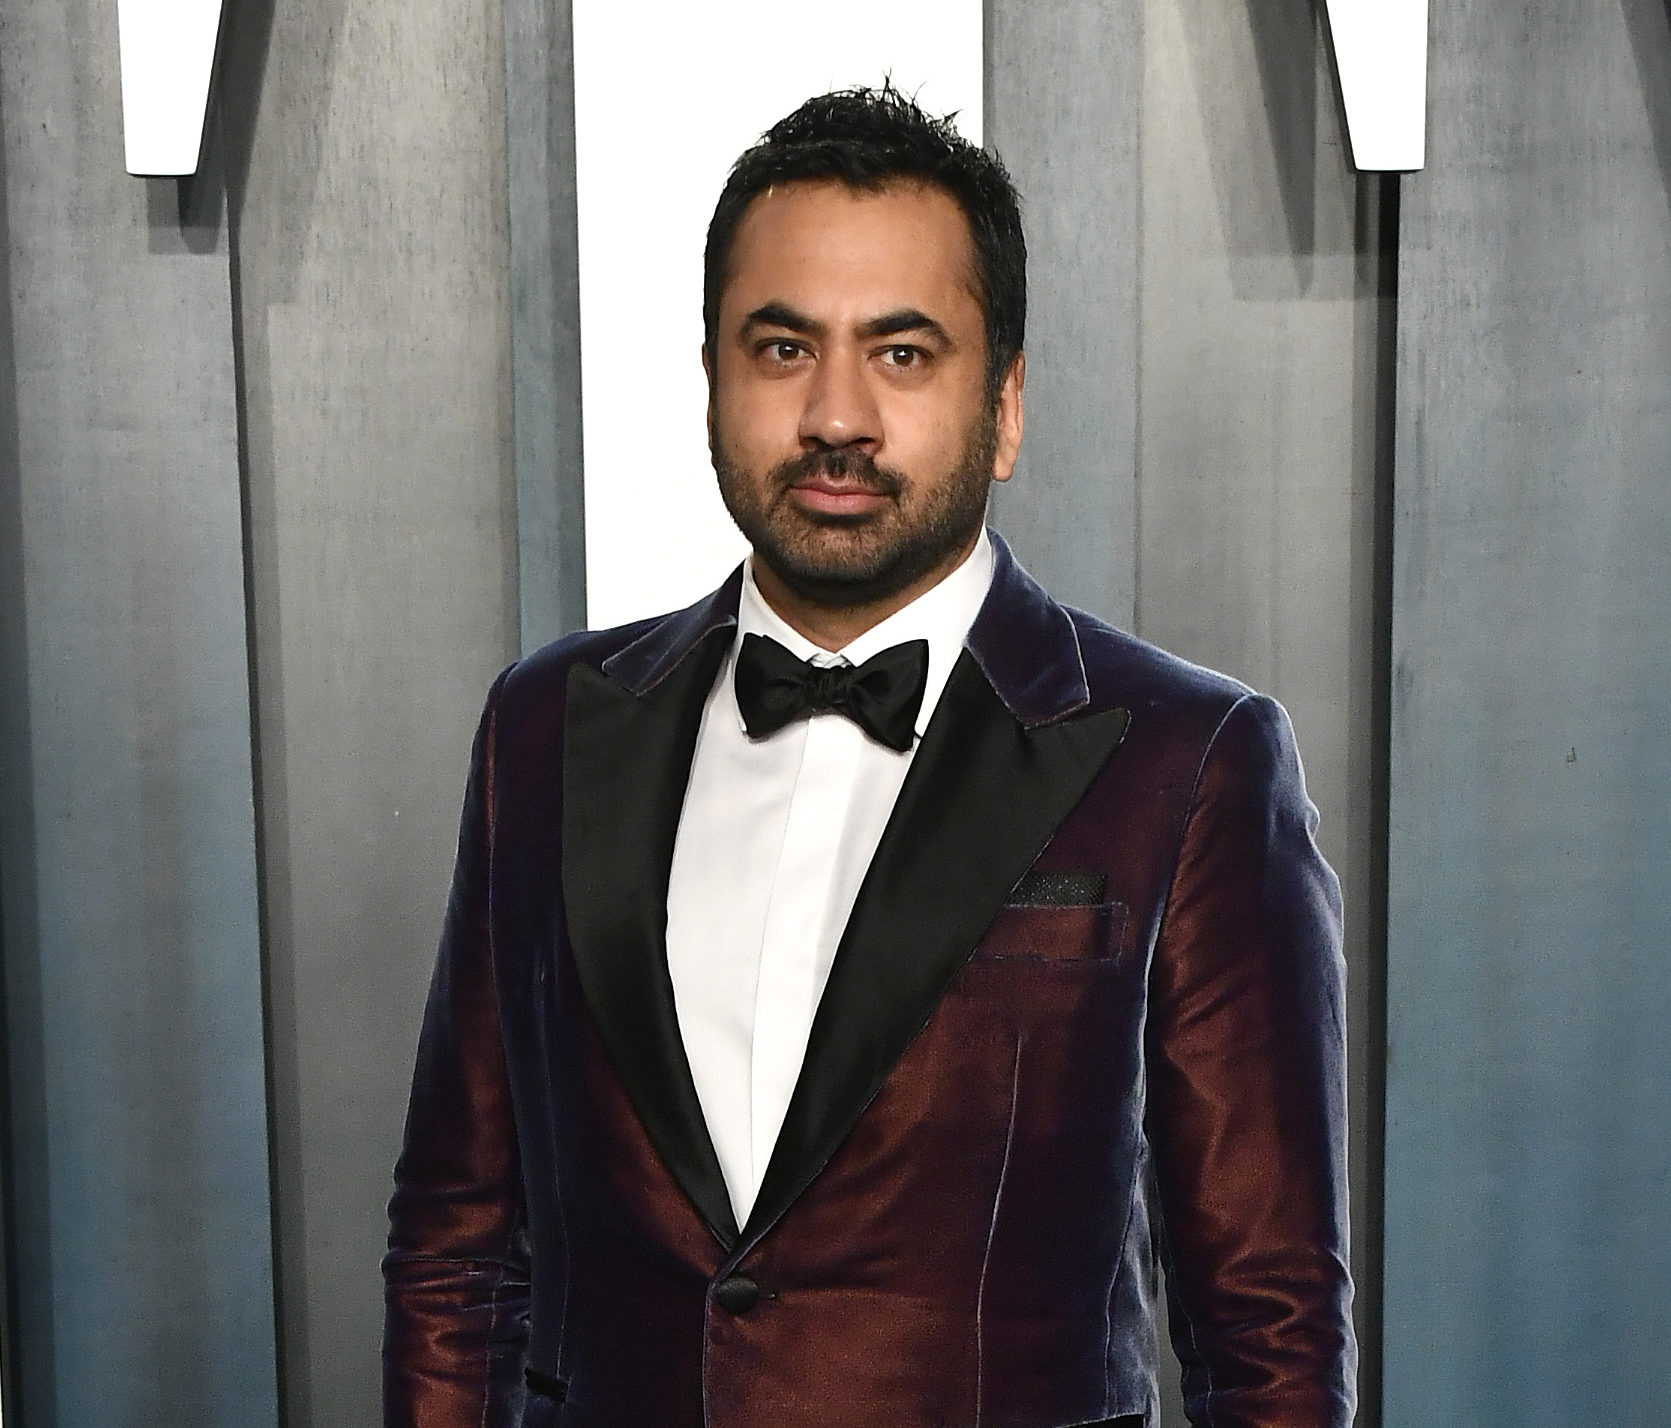 Actor Kal Penn opens up about his relationship in his new book and shares he engaged to partner Josh after 11 years.